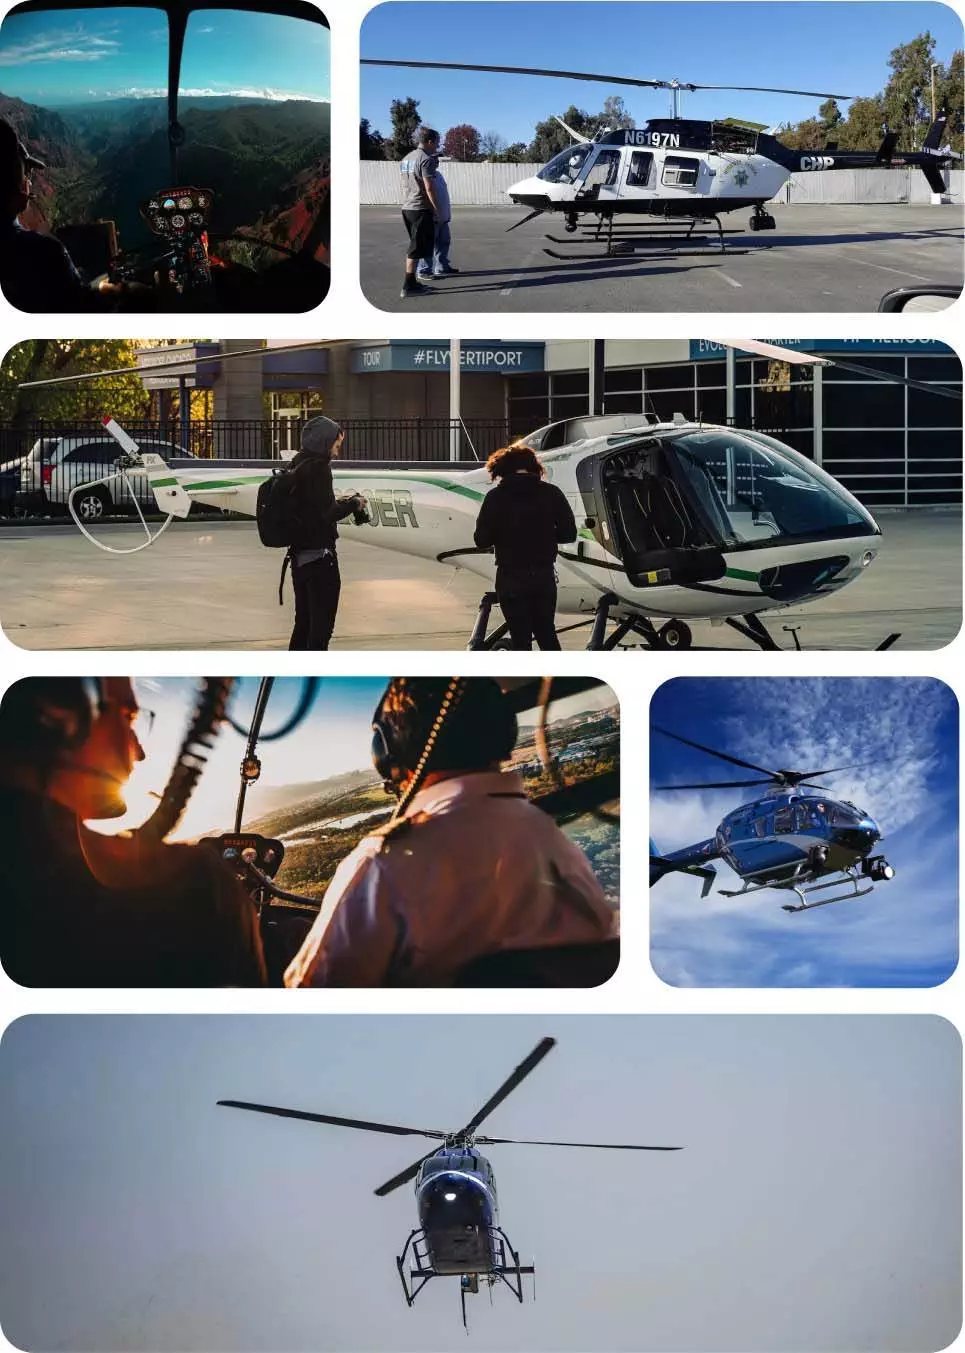 Our Helicopter | Capital Exotic Charter Tours | Helicopter Charter tour service rental company in Washington DC, Maryland and Virginia